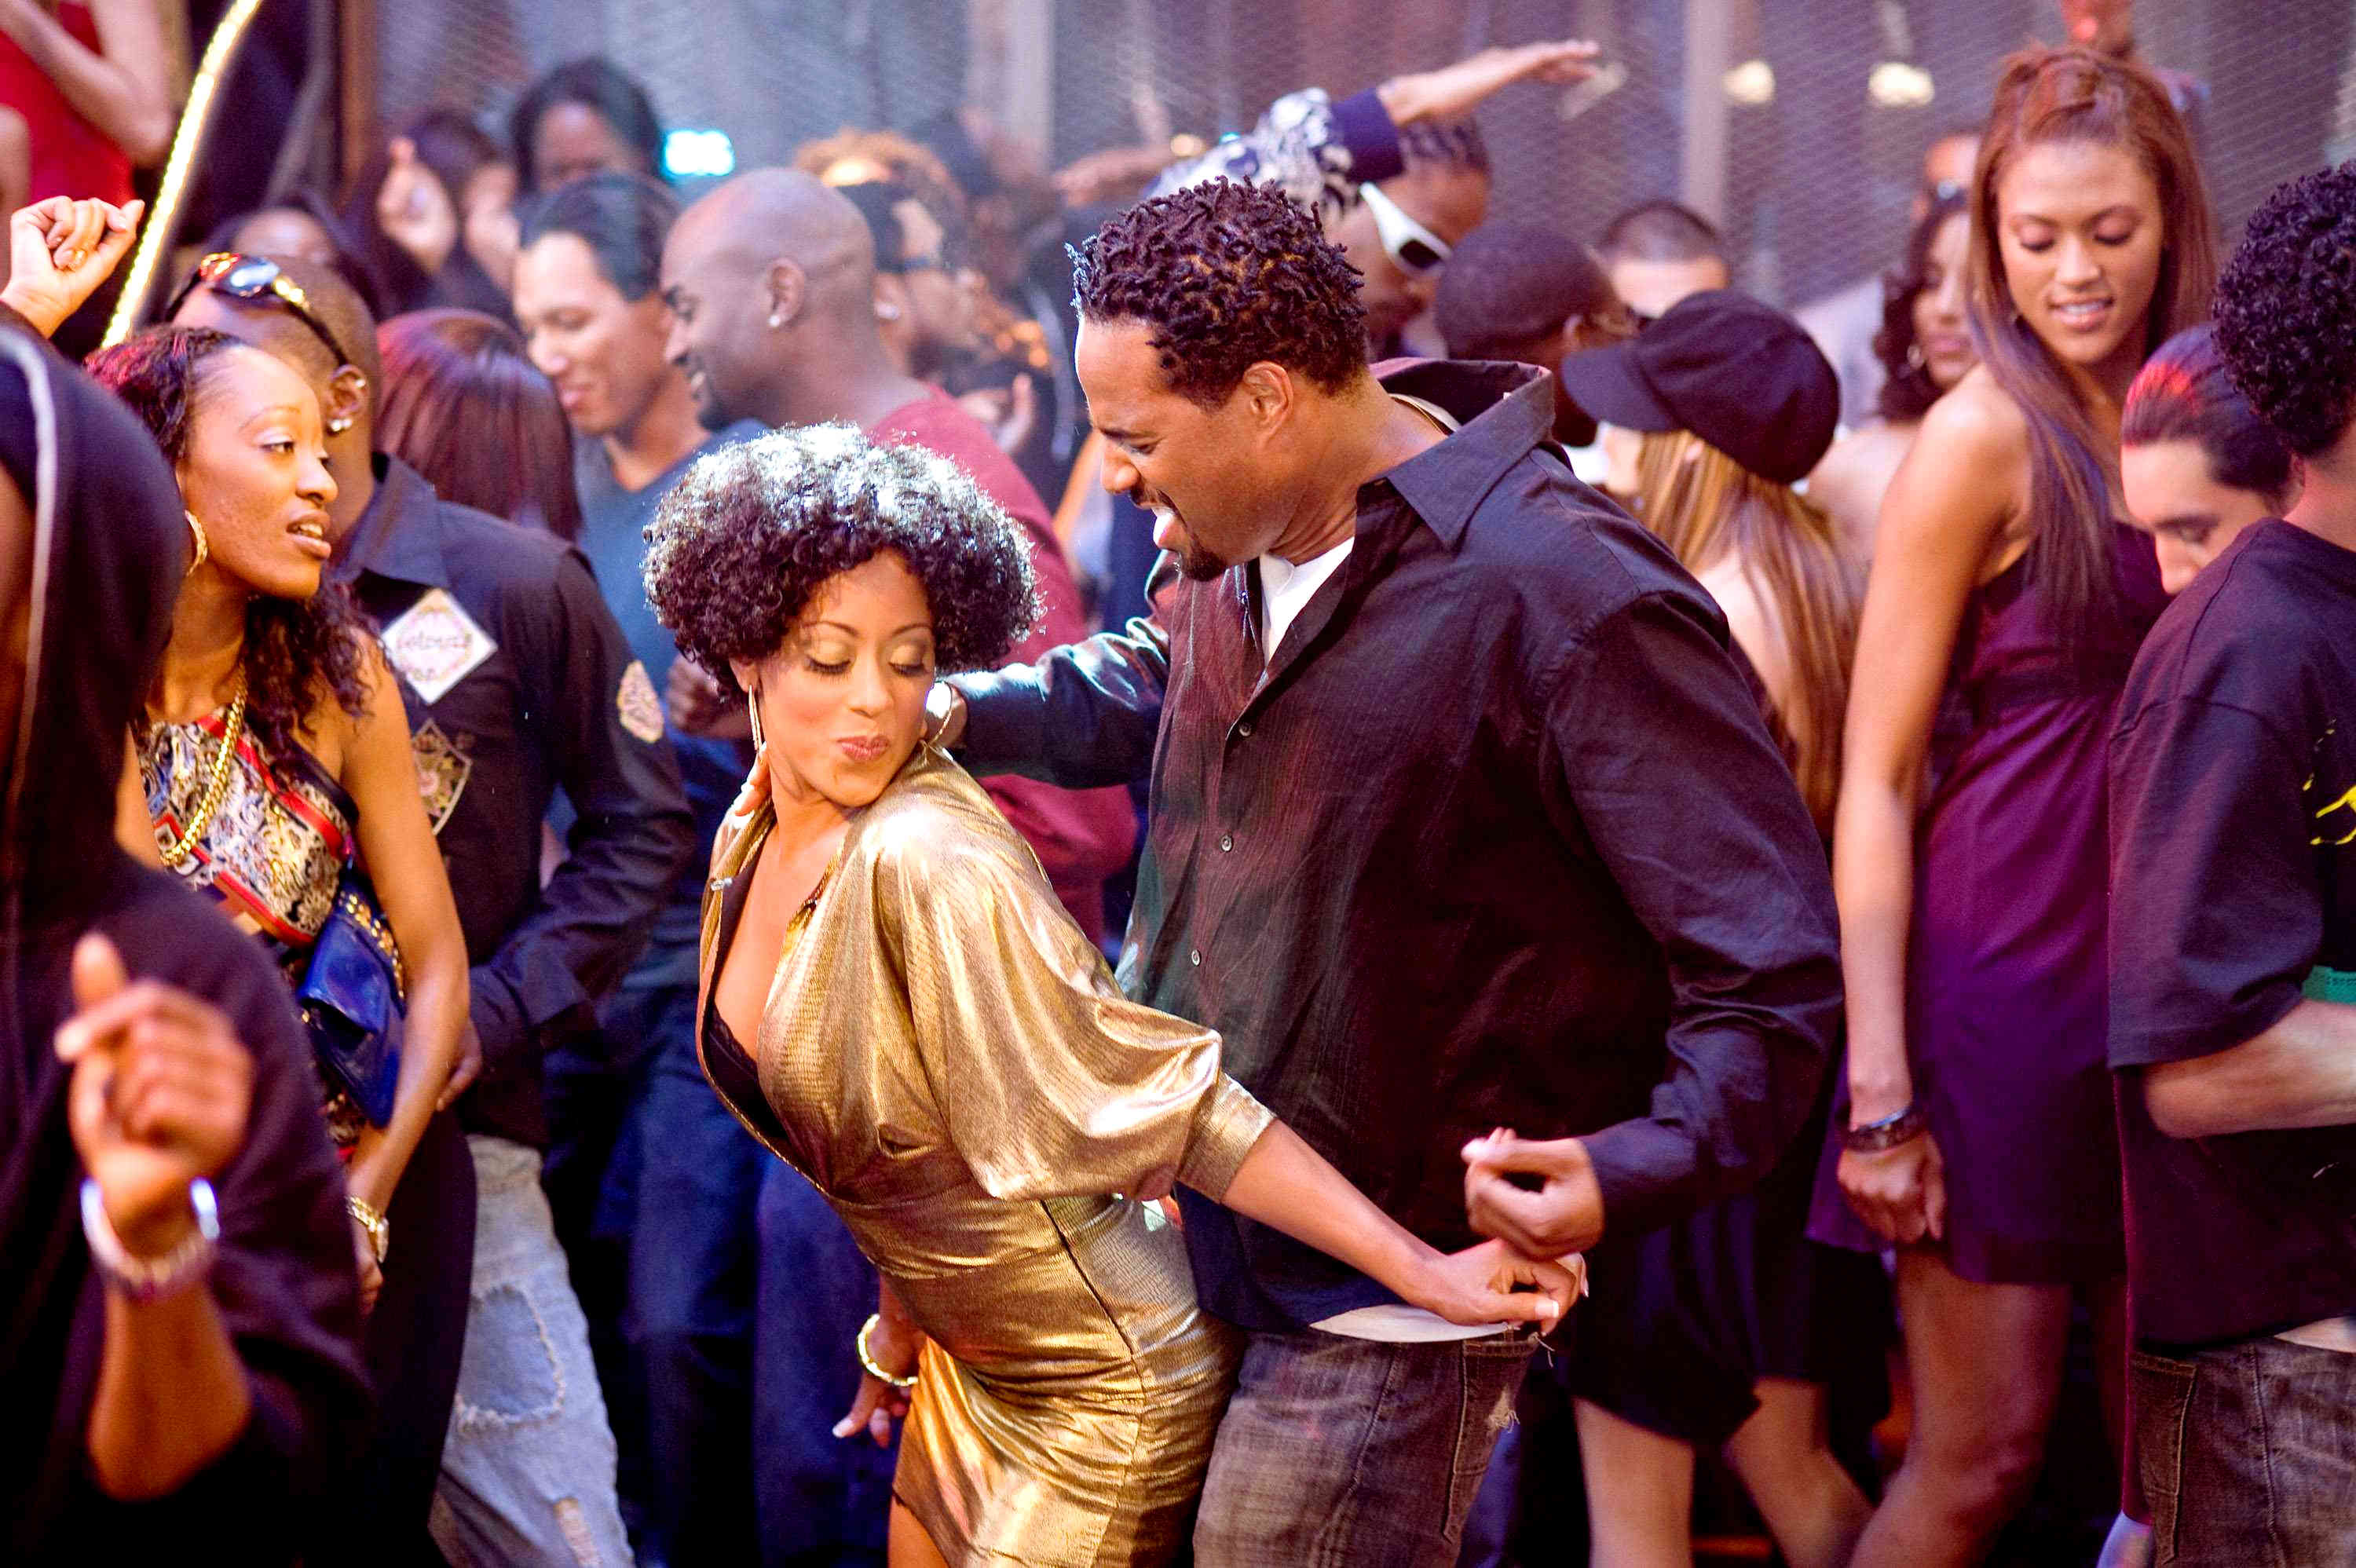 Essence Atkins stars as Charity and Marlon Wayans stars as Mr. Moody in Paramount Pictures' Dance Flick (2009). Photo credit by Glen Wilson.